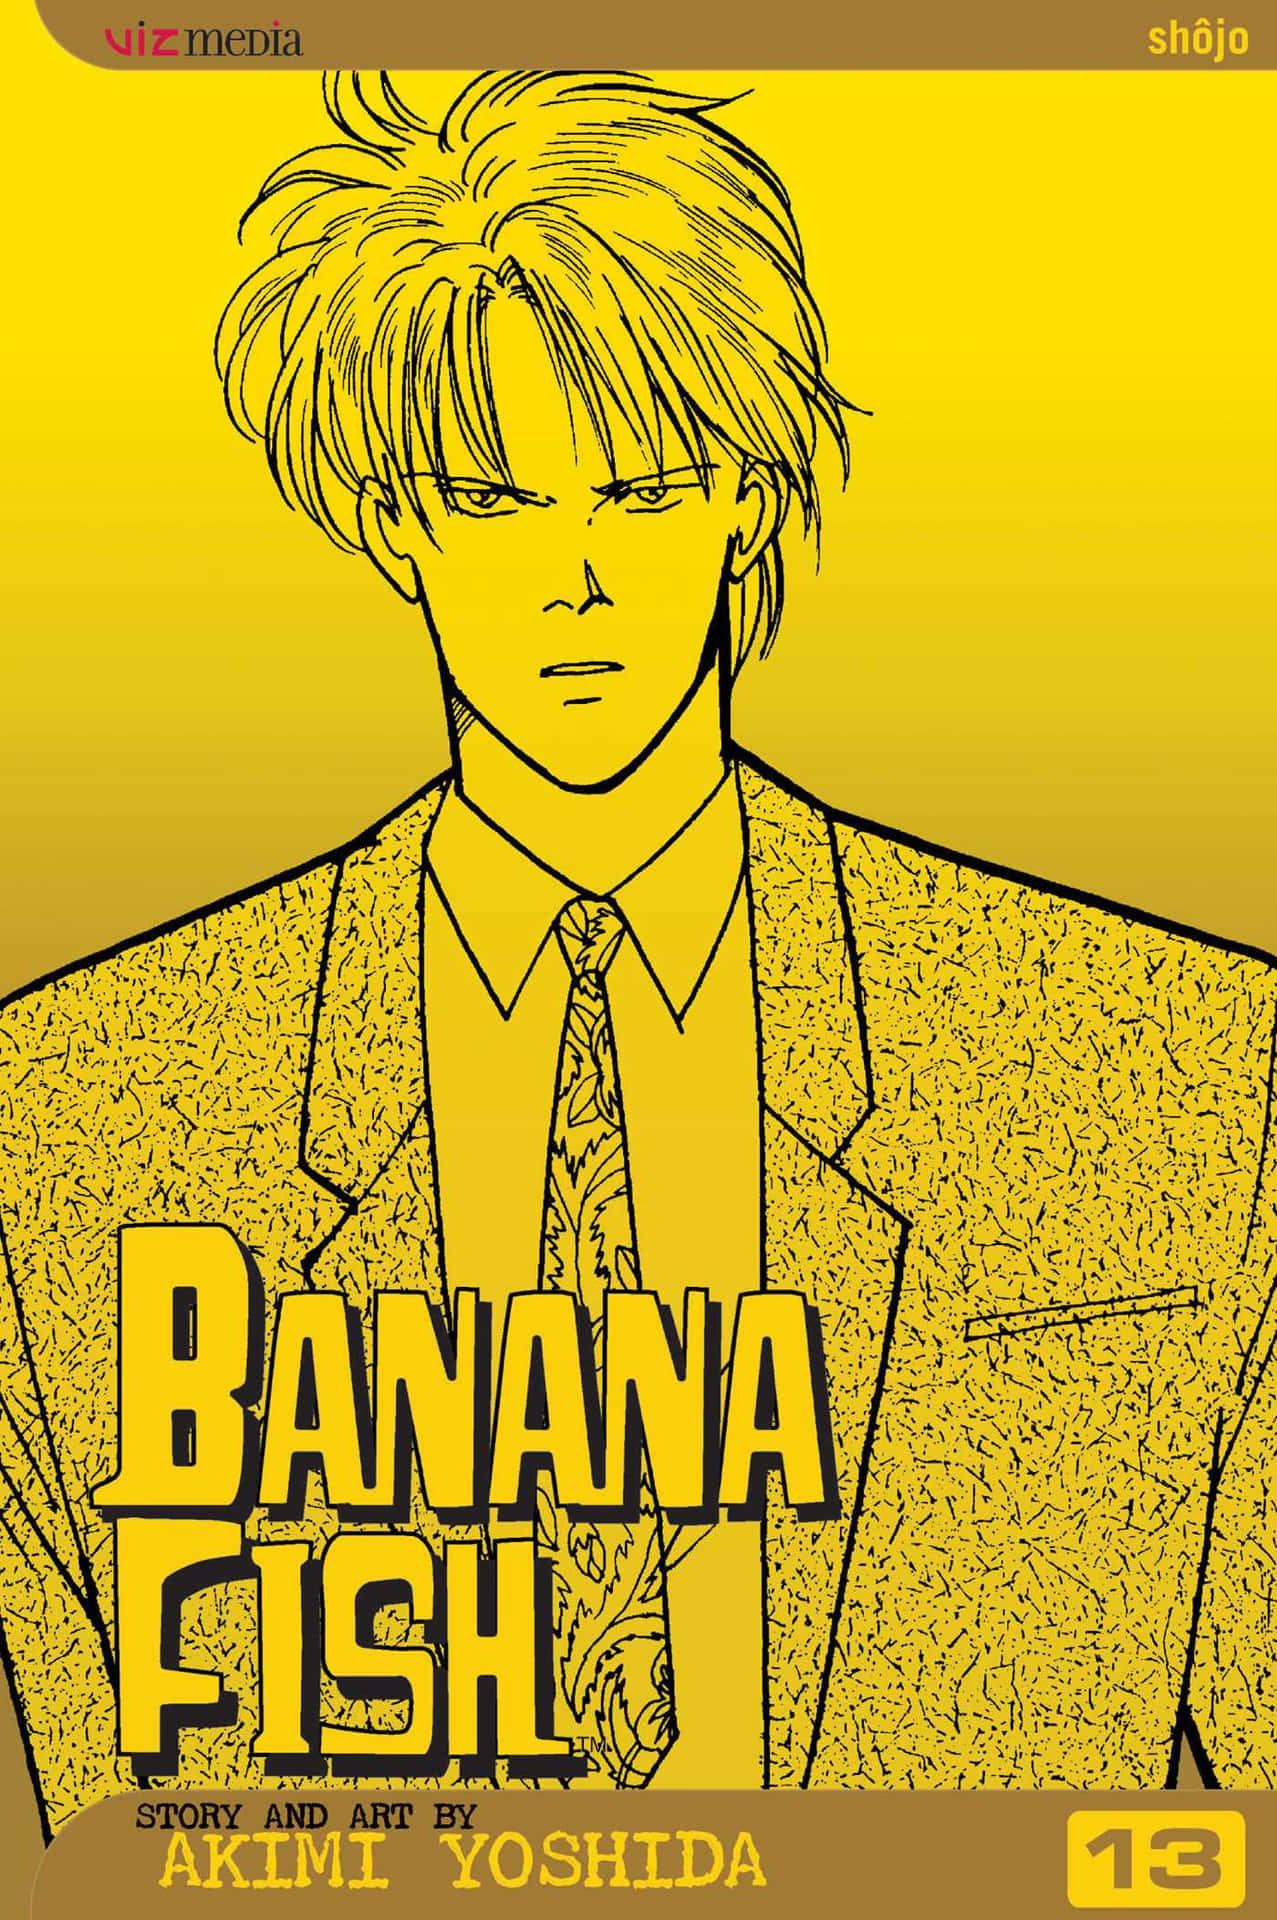 Bananas, Fish and Freedom - Ash Lynx and Eiji confront a threat in Banana Fish